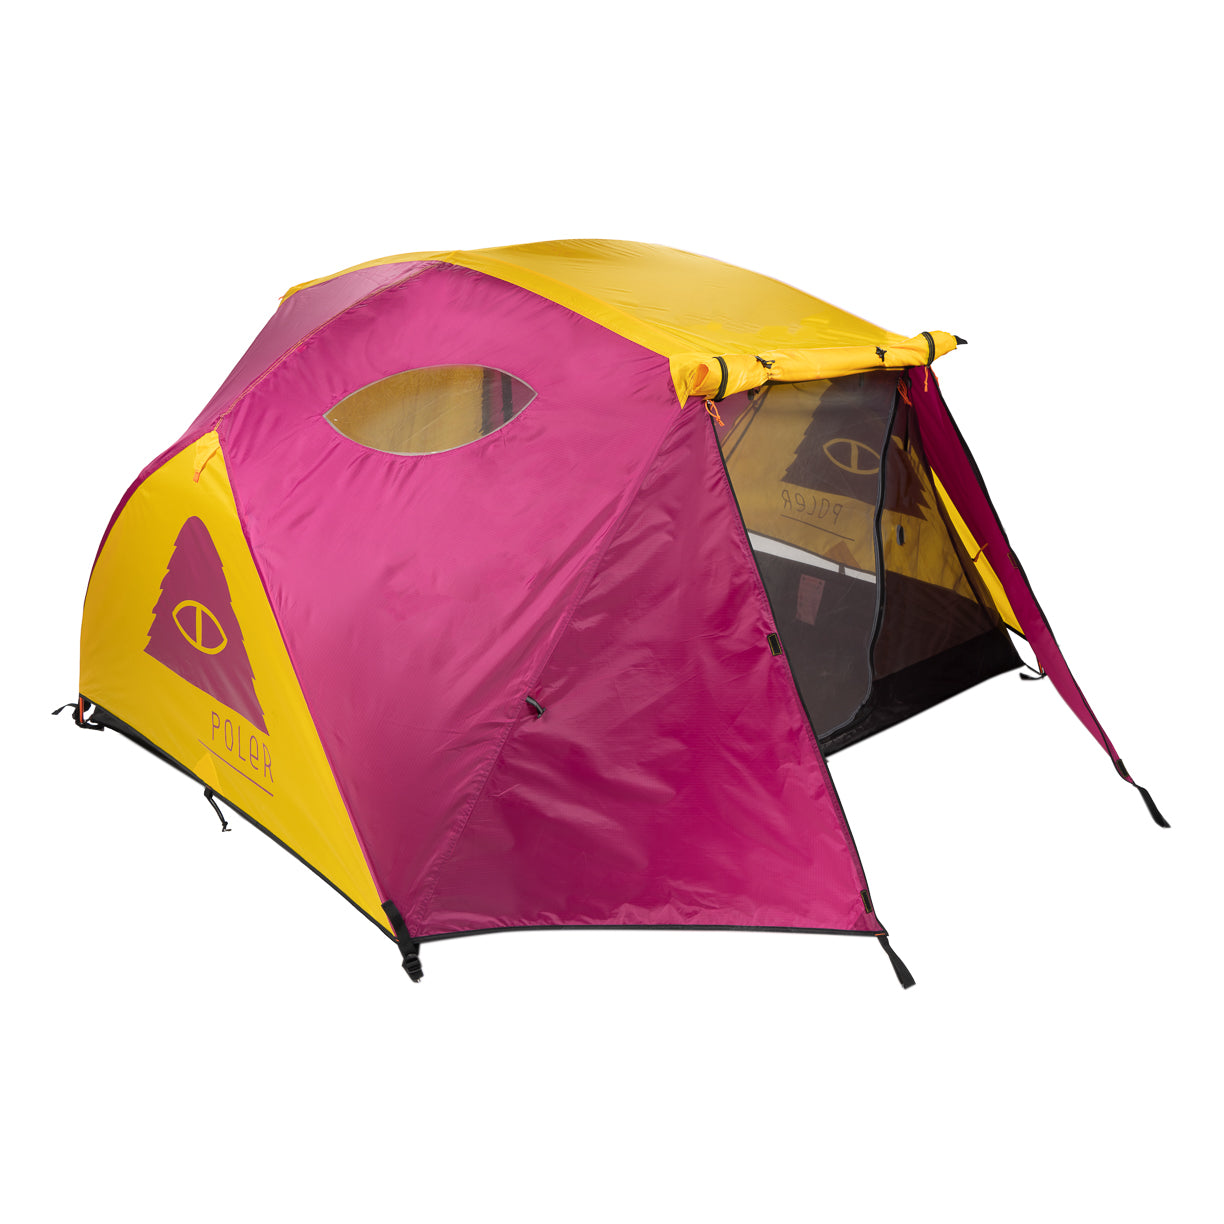 Two Person Tent - 1990 tents   